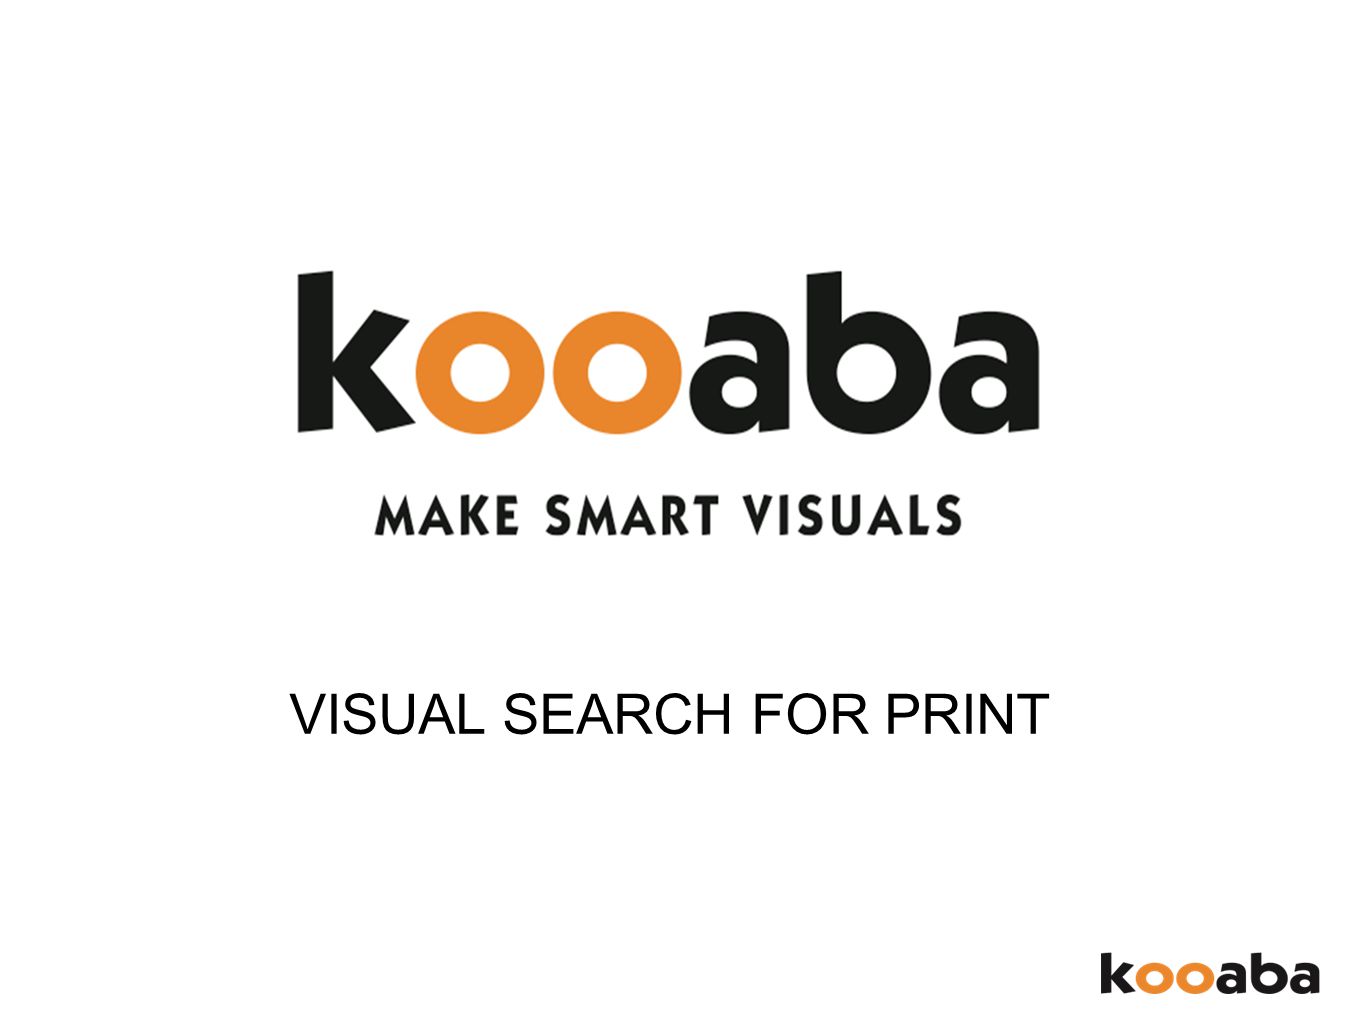 VISUAL SEARCH FOR PRINT